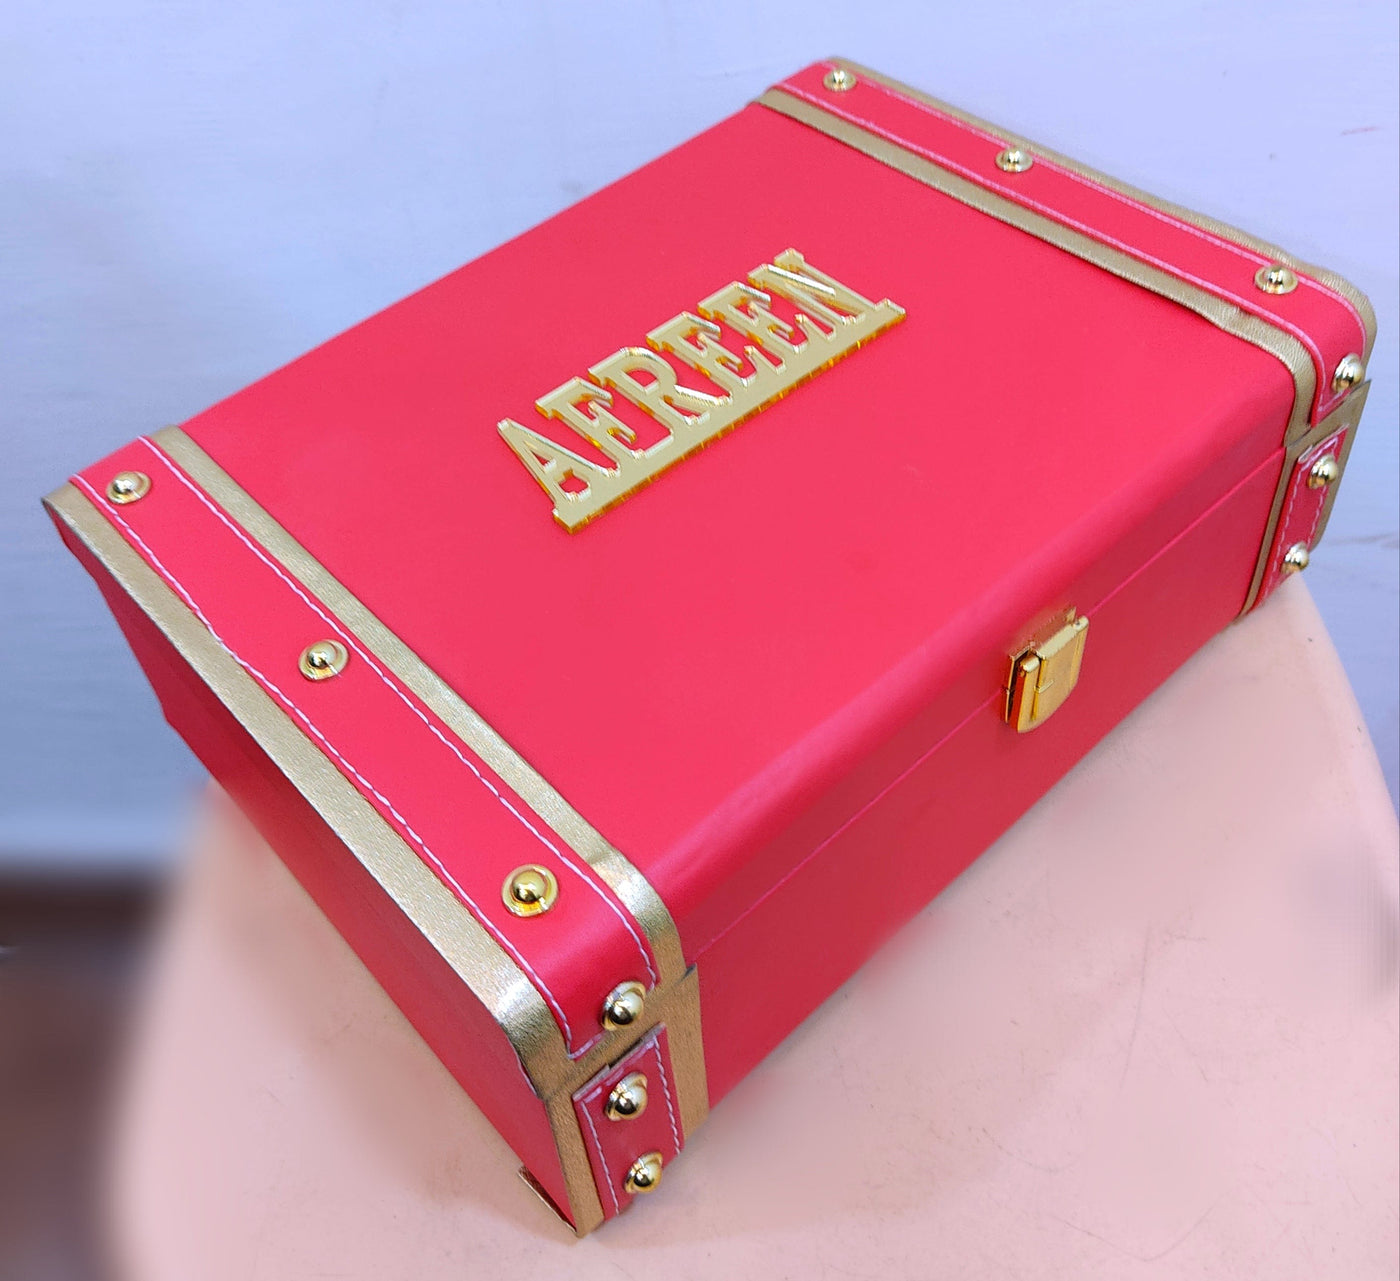 New Jaipur Handicraft Gift Trunks 💛 LAMANSH® Personalized Trunk boxes with custom name plates / Perfect for Gifting 🎁 & Giveaways